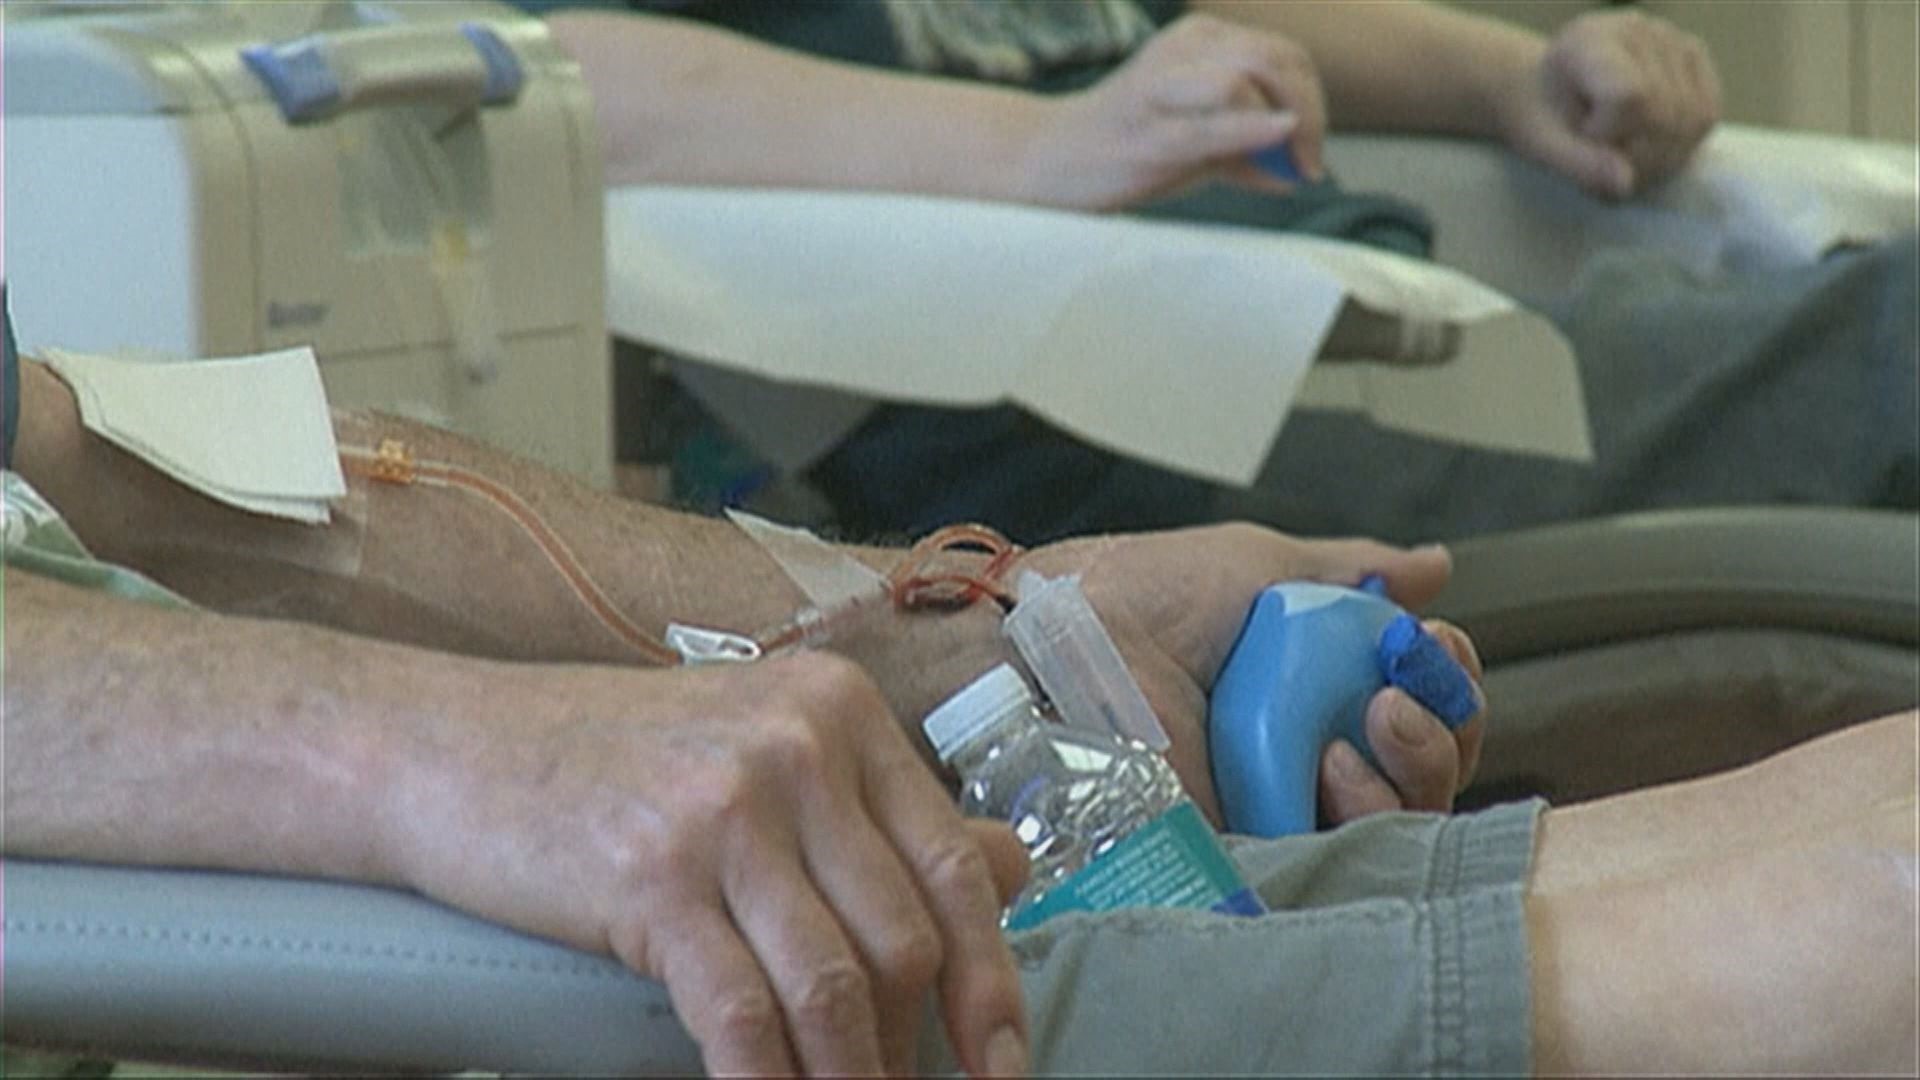 Blood donors are in high demand during the summer months because that's when they have a "giving slump," according to Carter BloodCare. There's a blood drive Friday at Providence Hospice in Waco from 10 a.m. to 2 p.m.